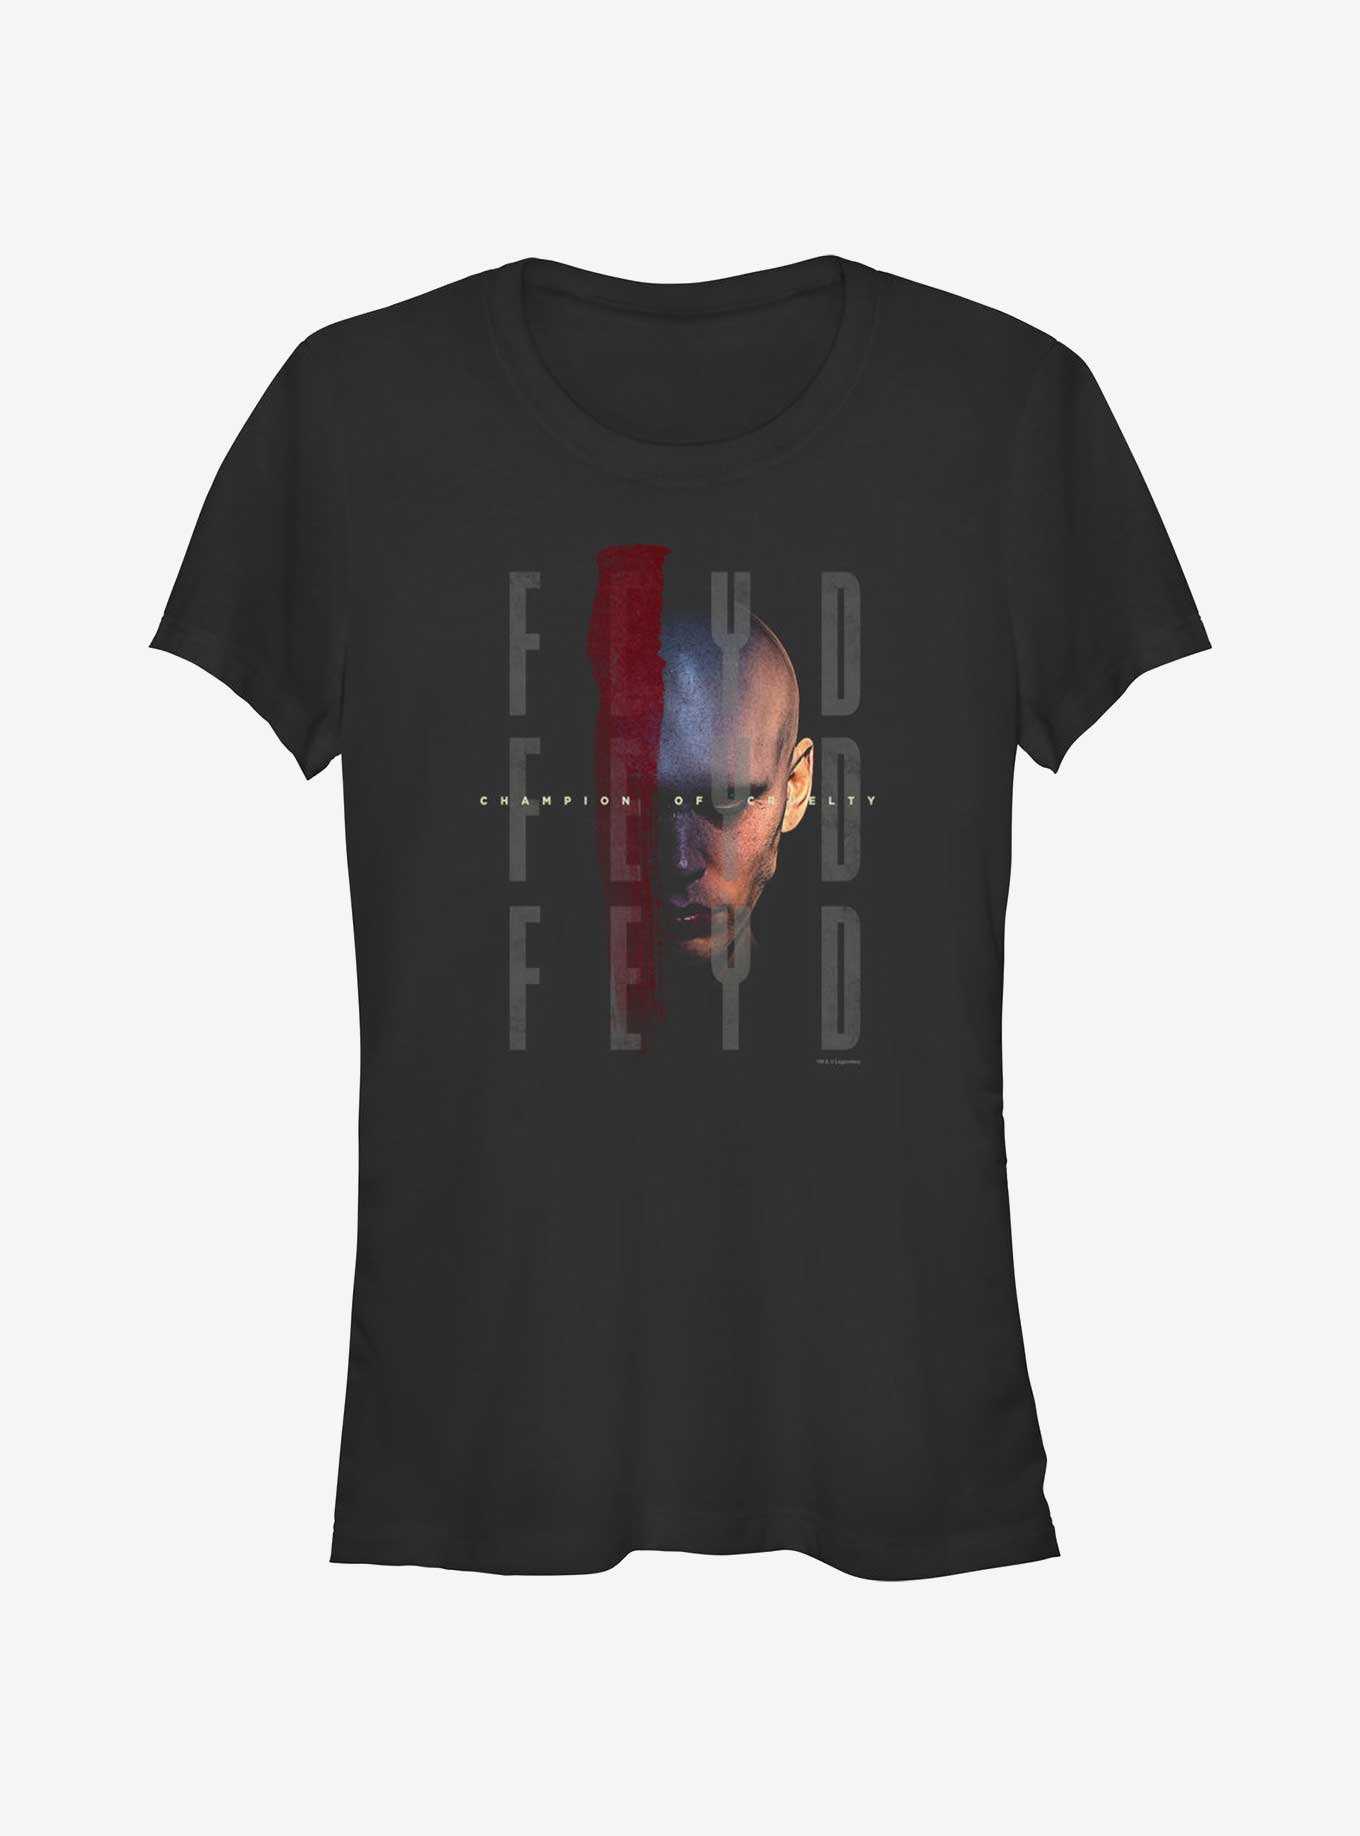 Dune: Part Two Dune: Part Two Feyd Girls T-Shirt, , hi-res